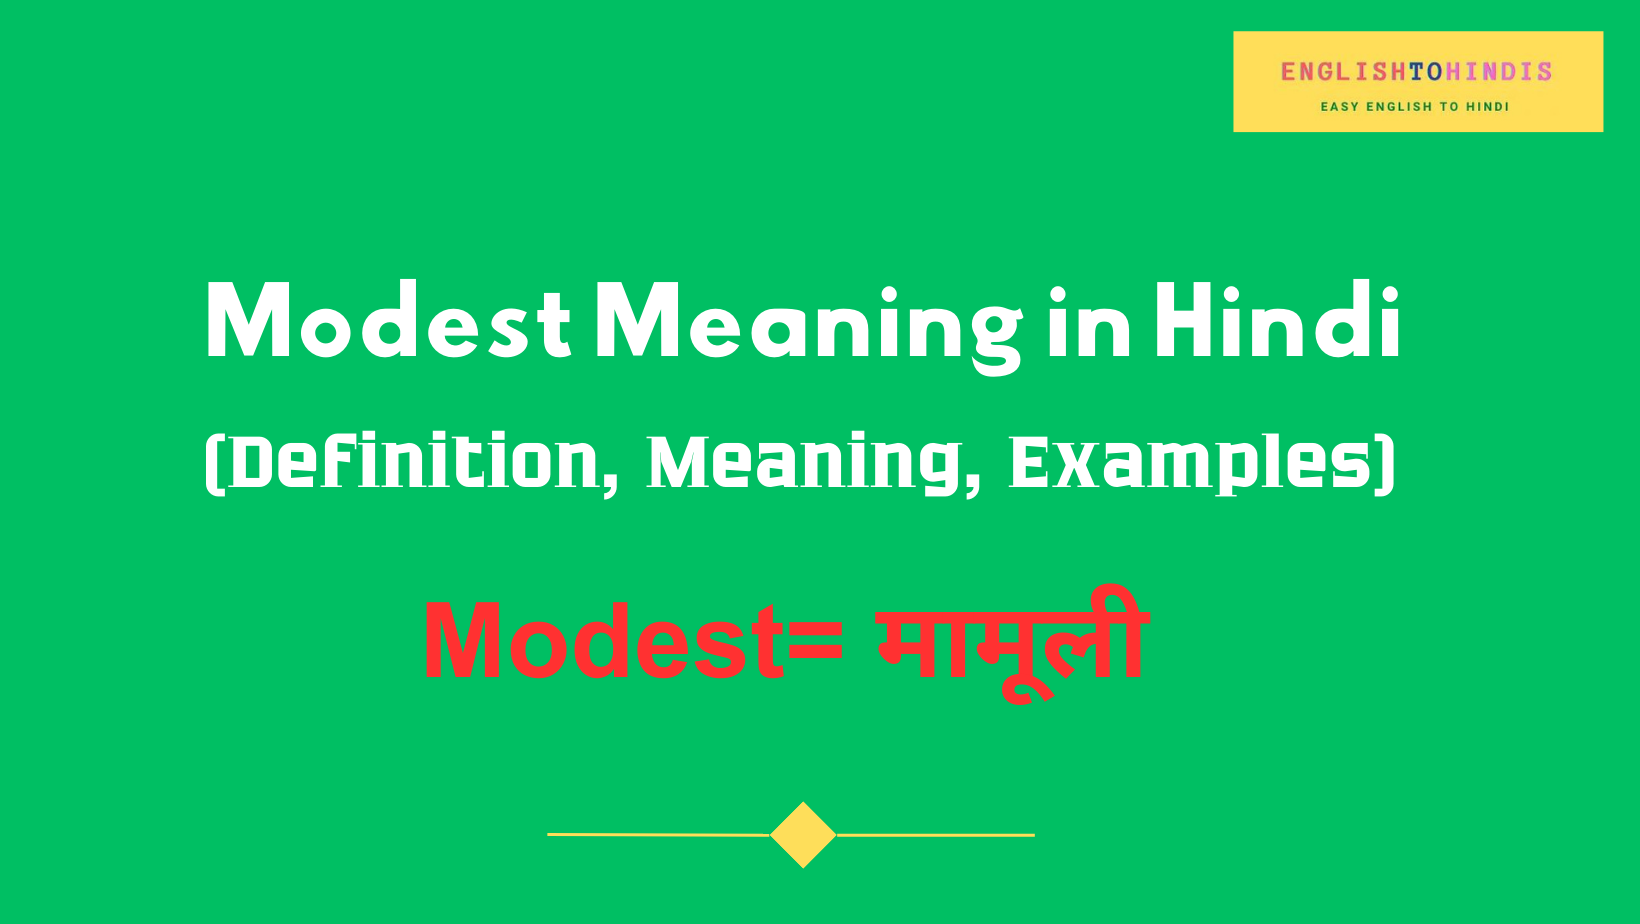 Modest meaning in Hindi